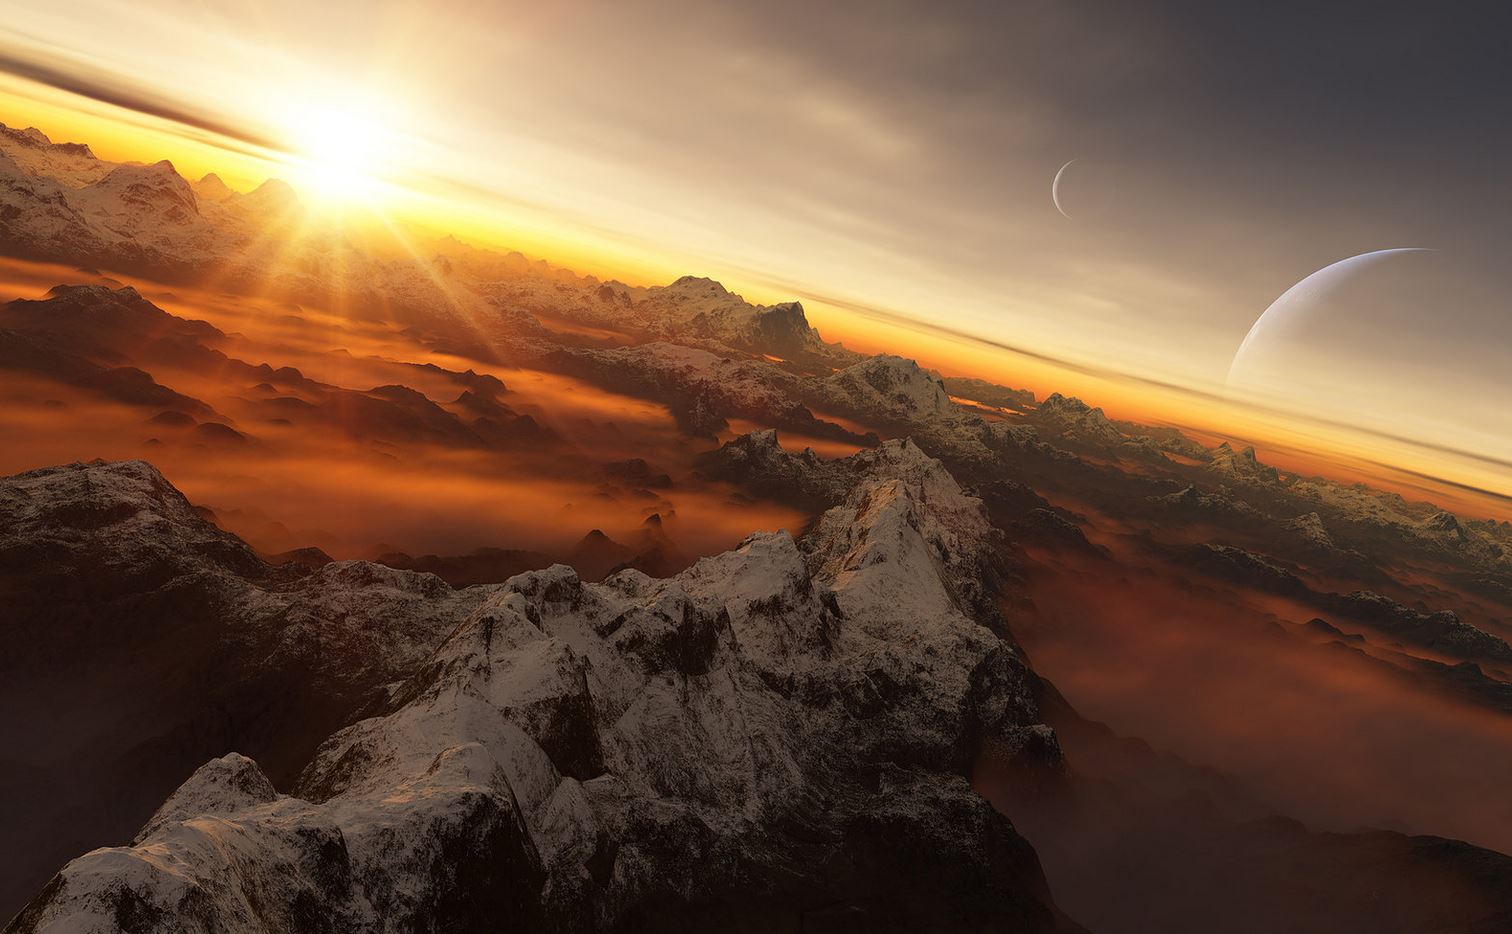 South Africans Given Chance To Name Newly Discovered Planet